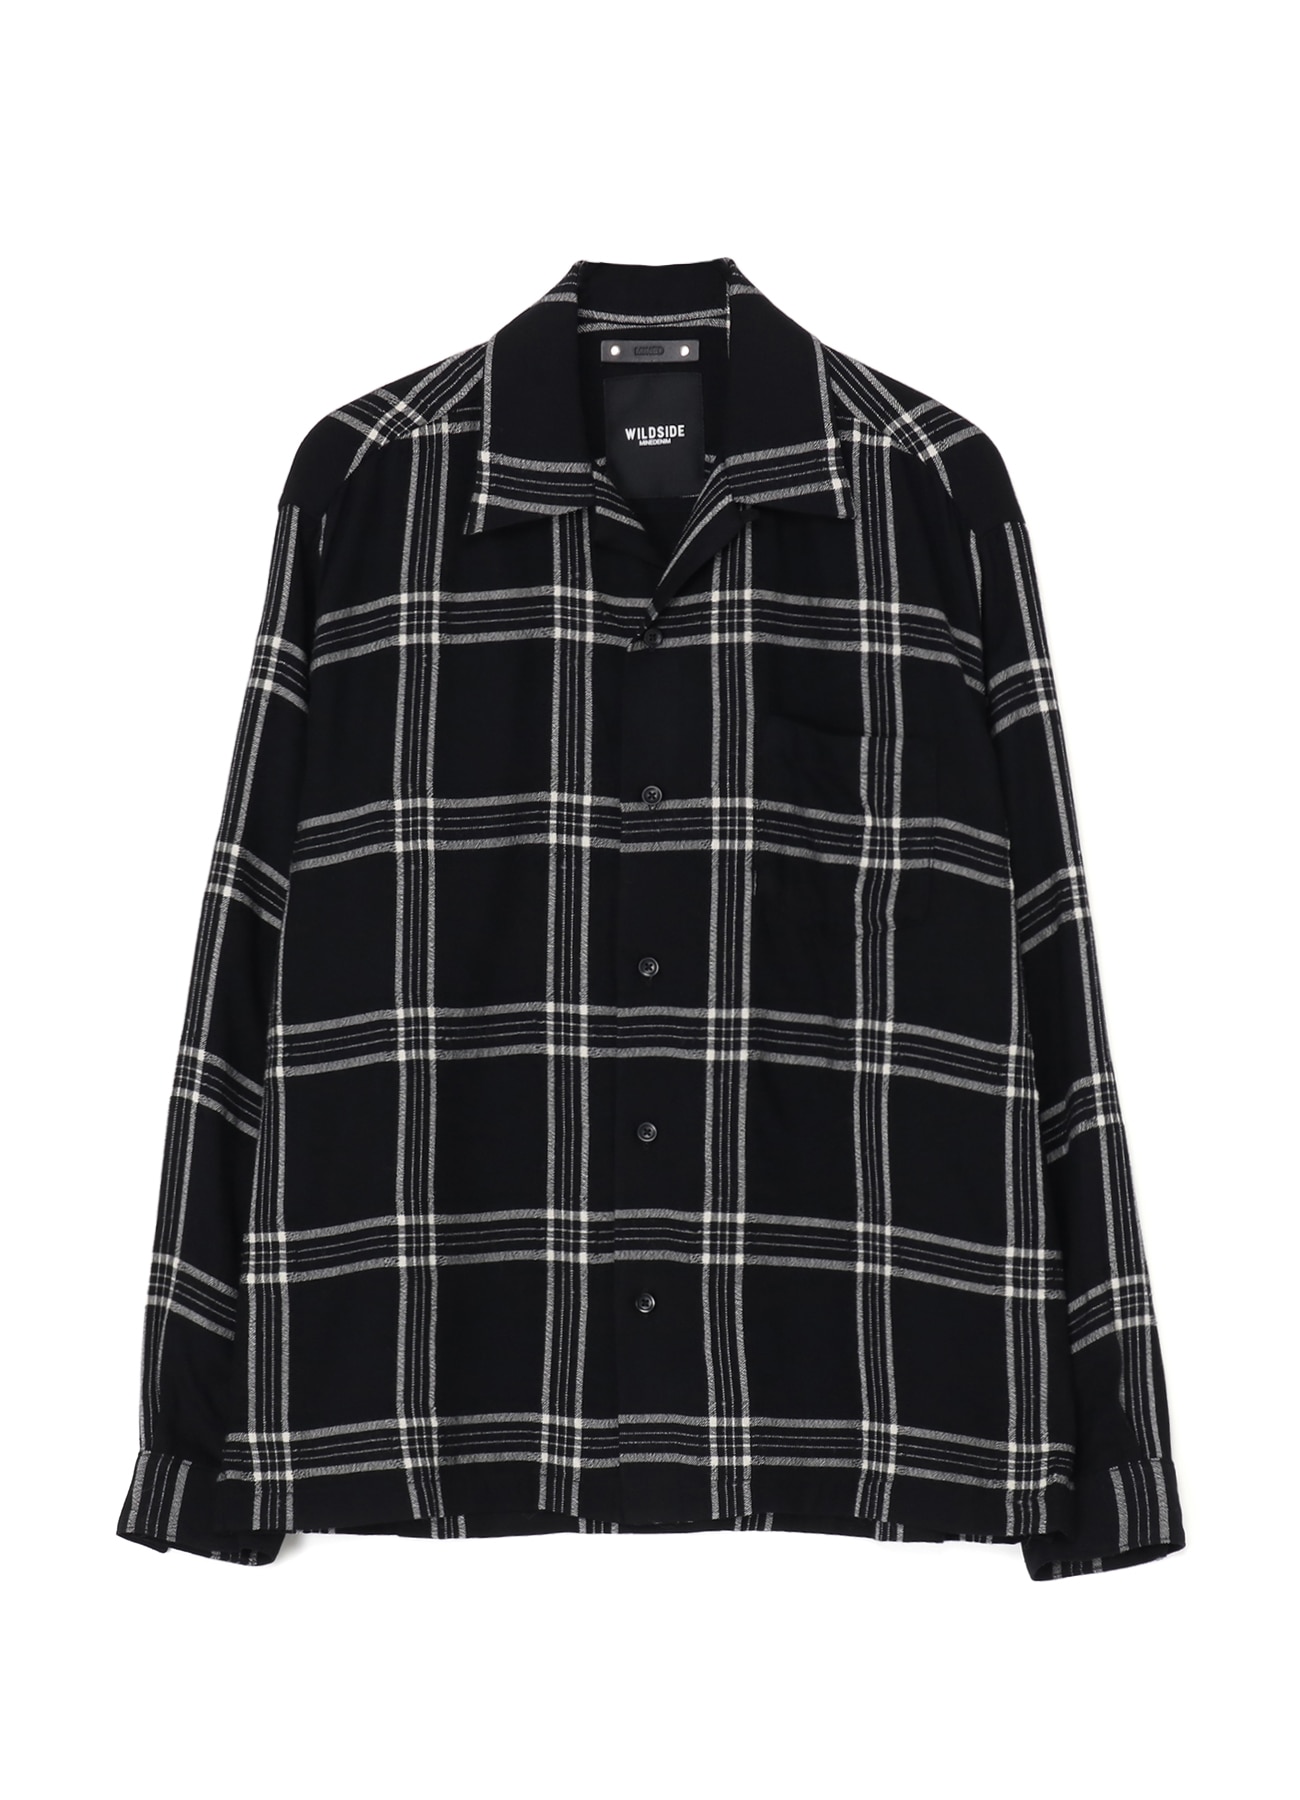 WILDSIDE ×MINEDENIM R.Wool Flannel Check Embroidery Open Collar SH